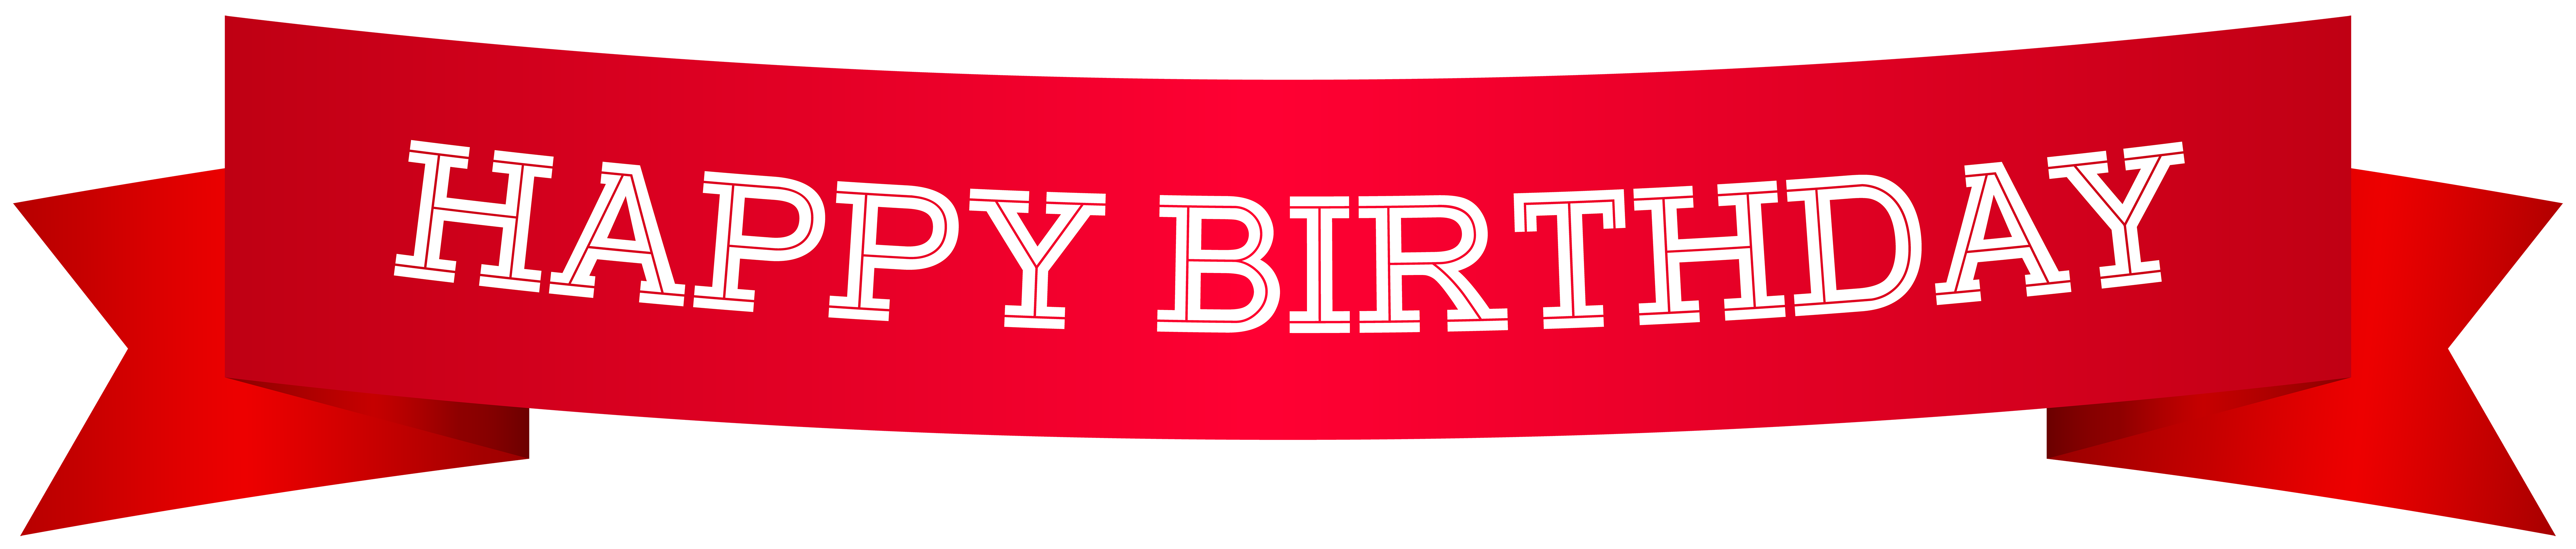 0-result-images-of-happy-birthday-banner-design-png-png-image-collection